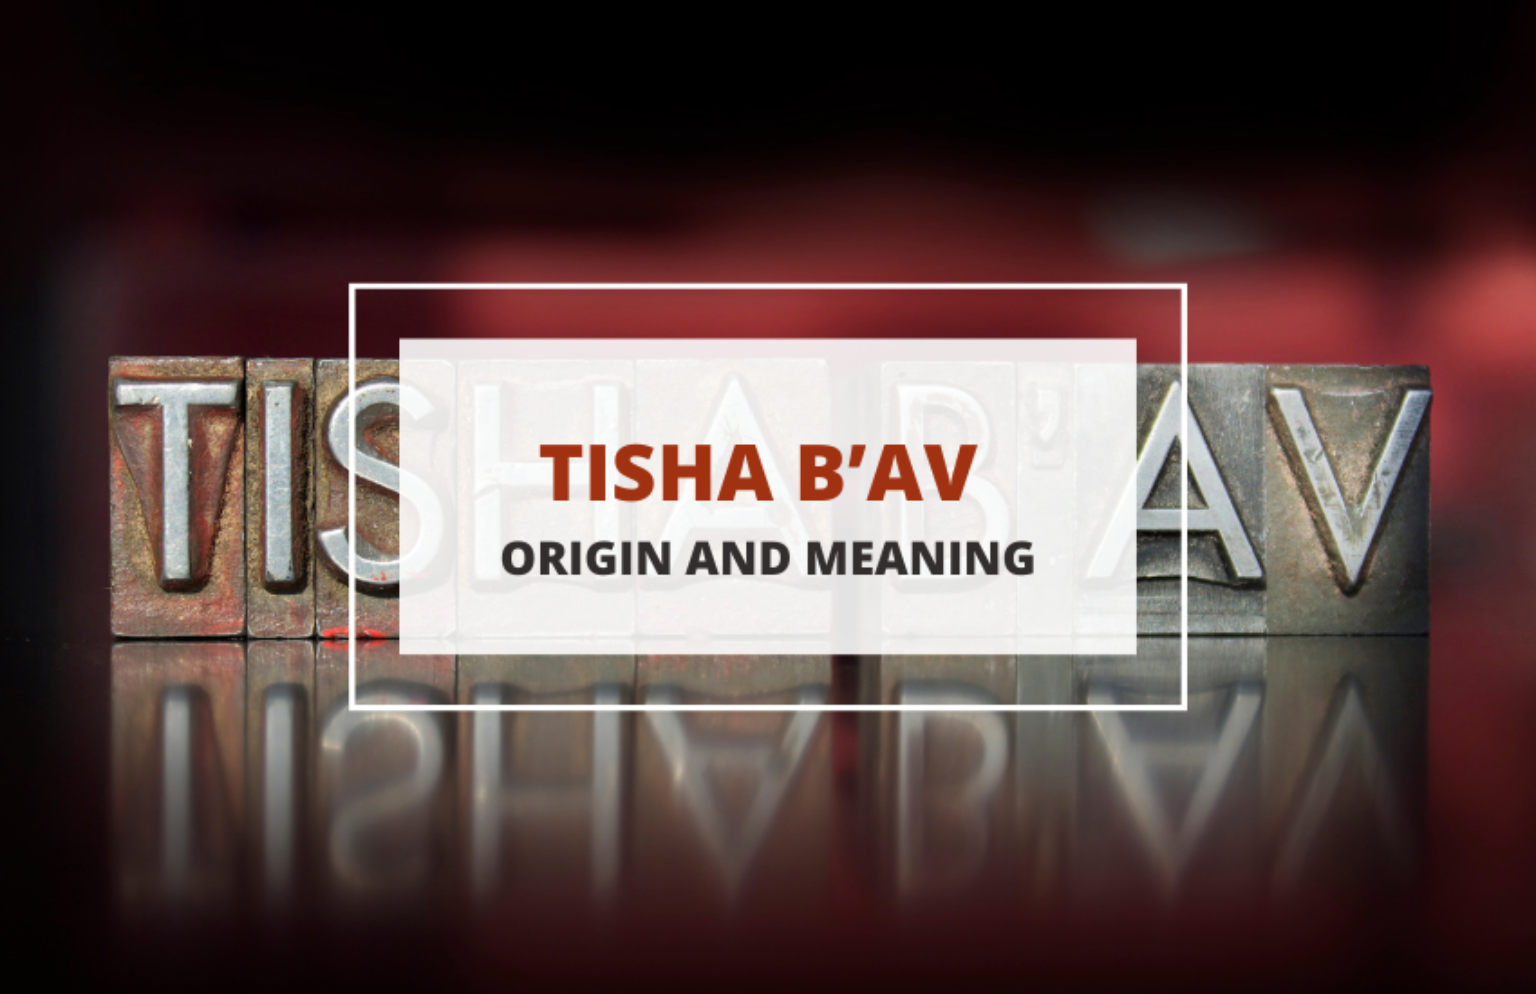 Tisha B'Av A Day of Mourning and Reflection in Jewish Tradition